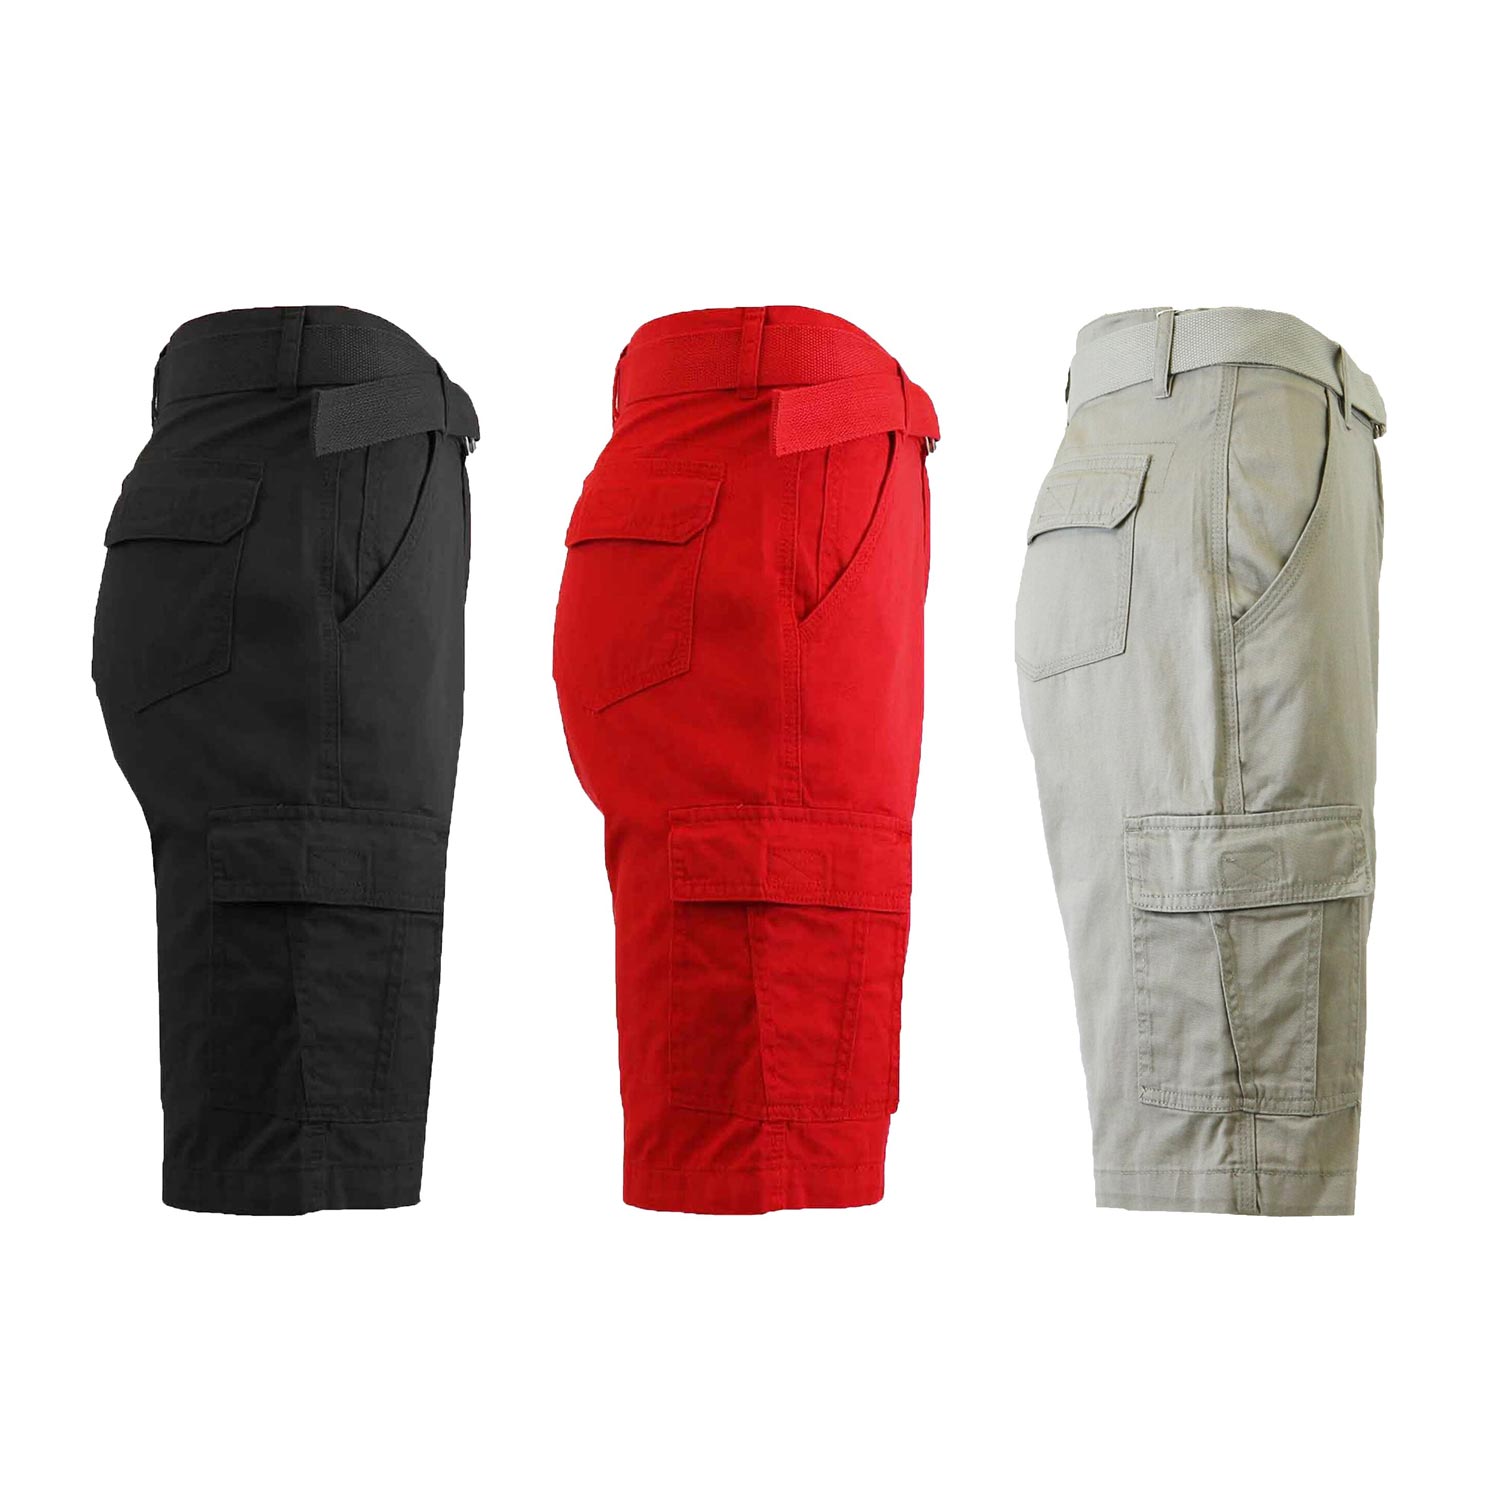 3 Pack Men's Belted Cotton Cargo Shorts